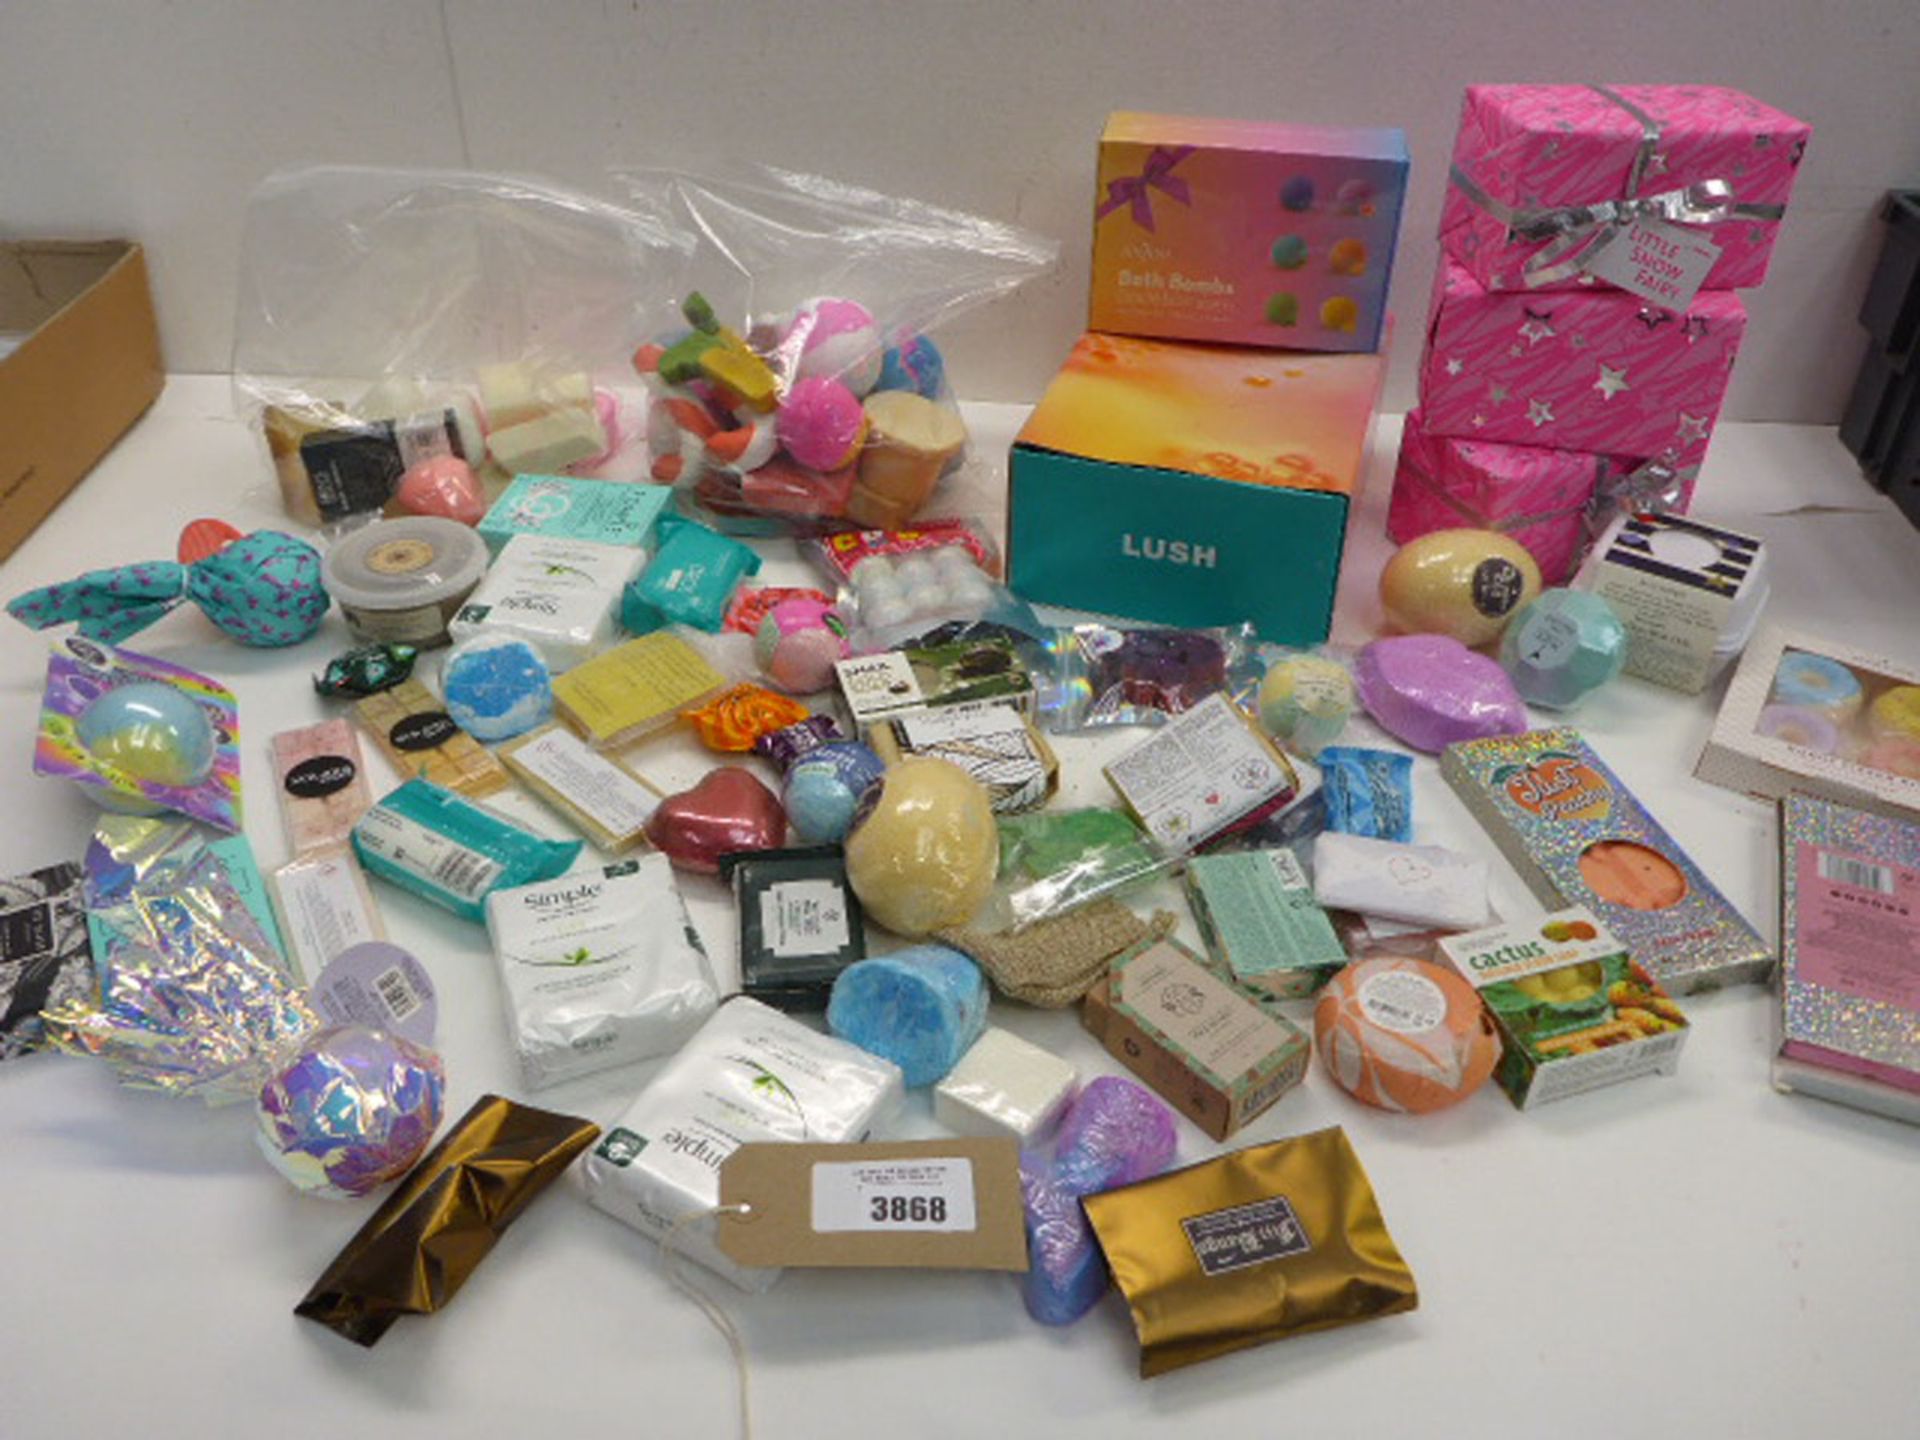 Large selection of bath bombs, wax melts and bars of soap